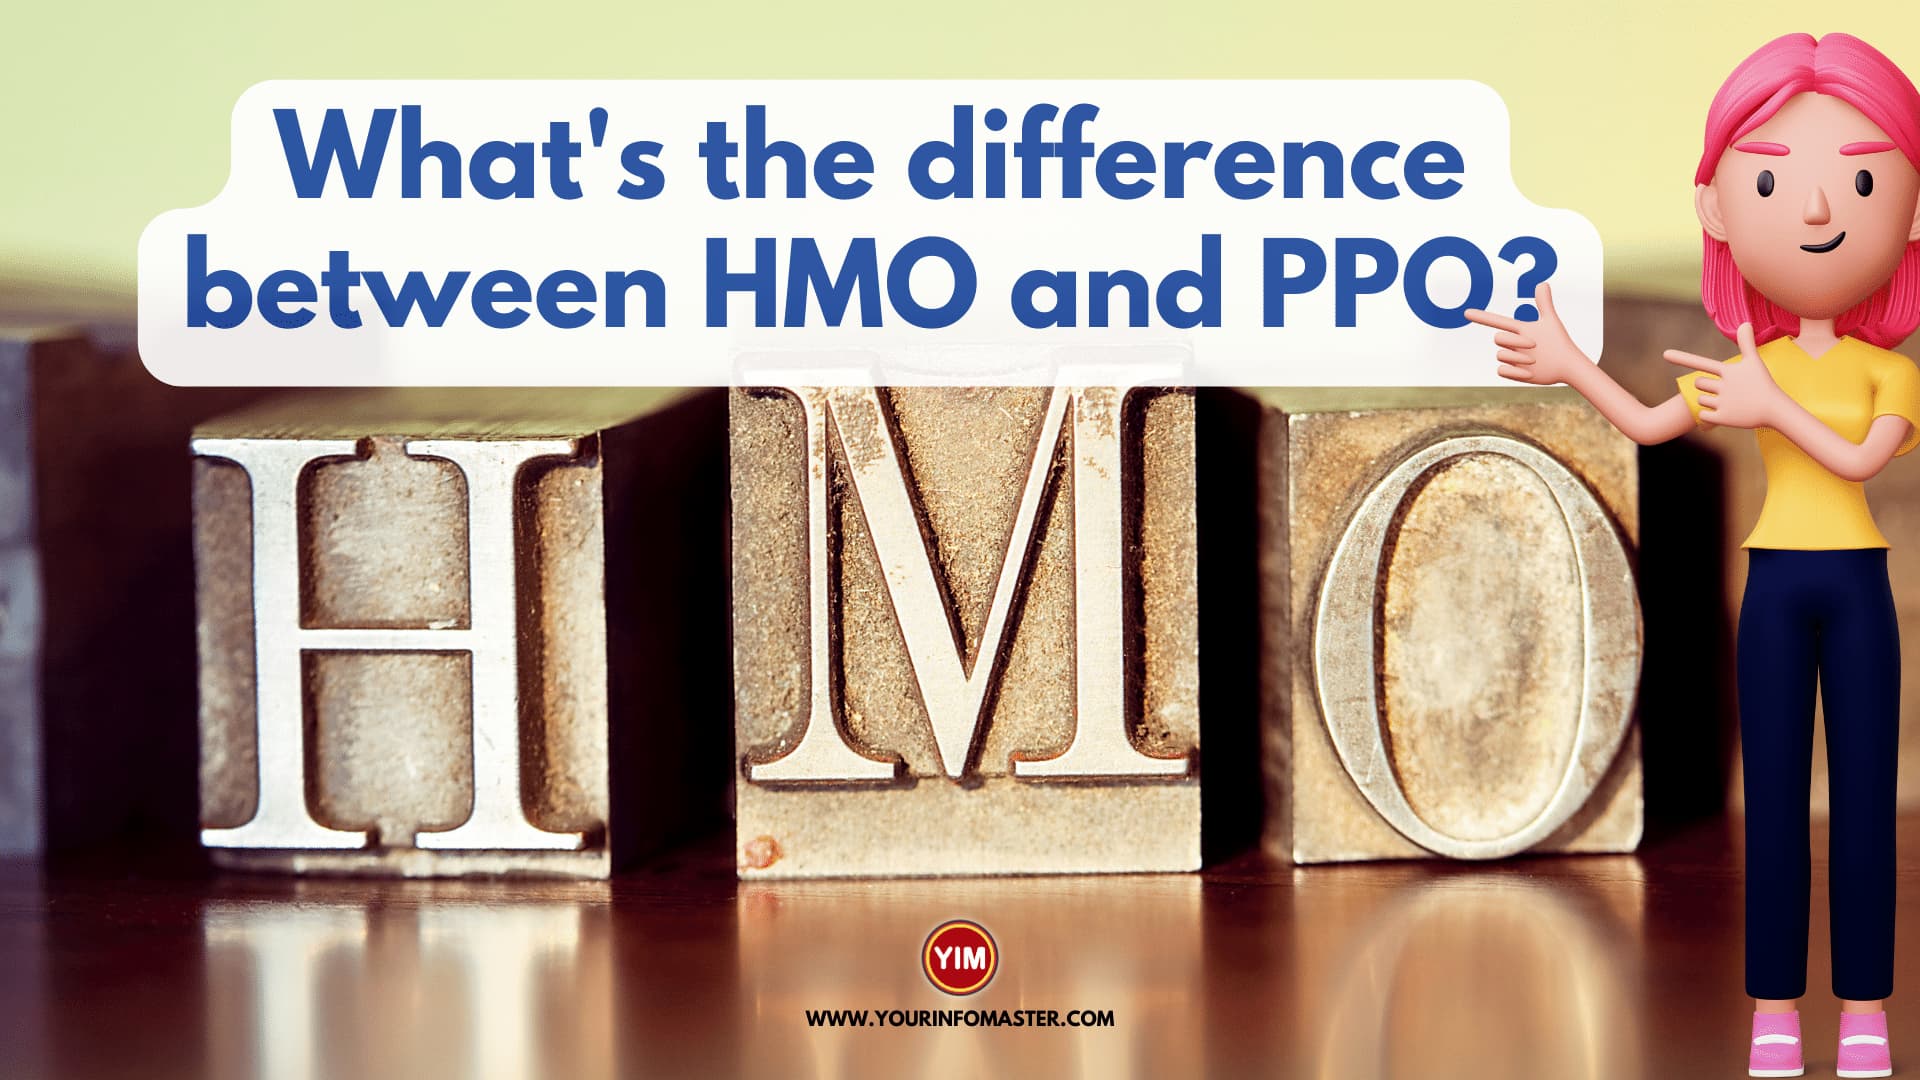 What's the difference between HMO and PPO